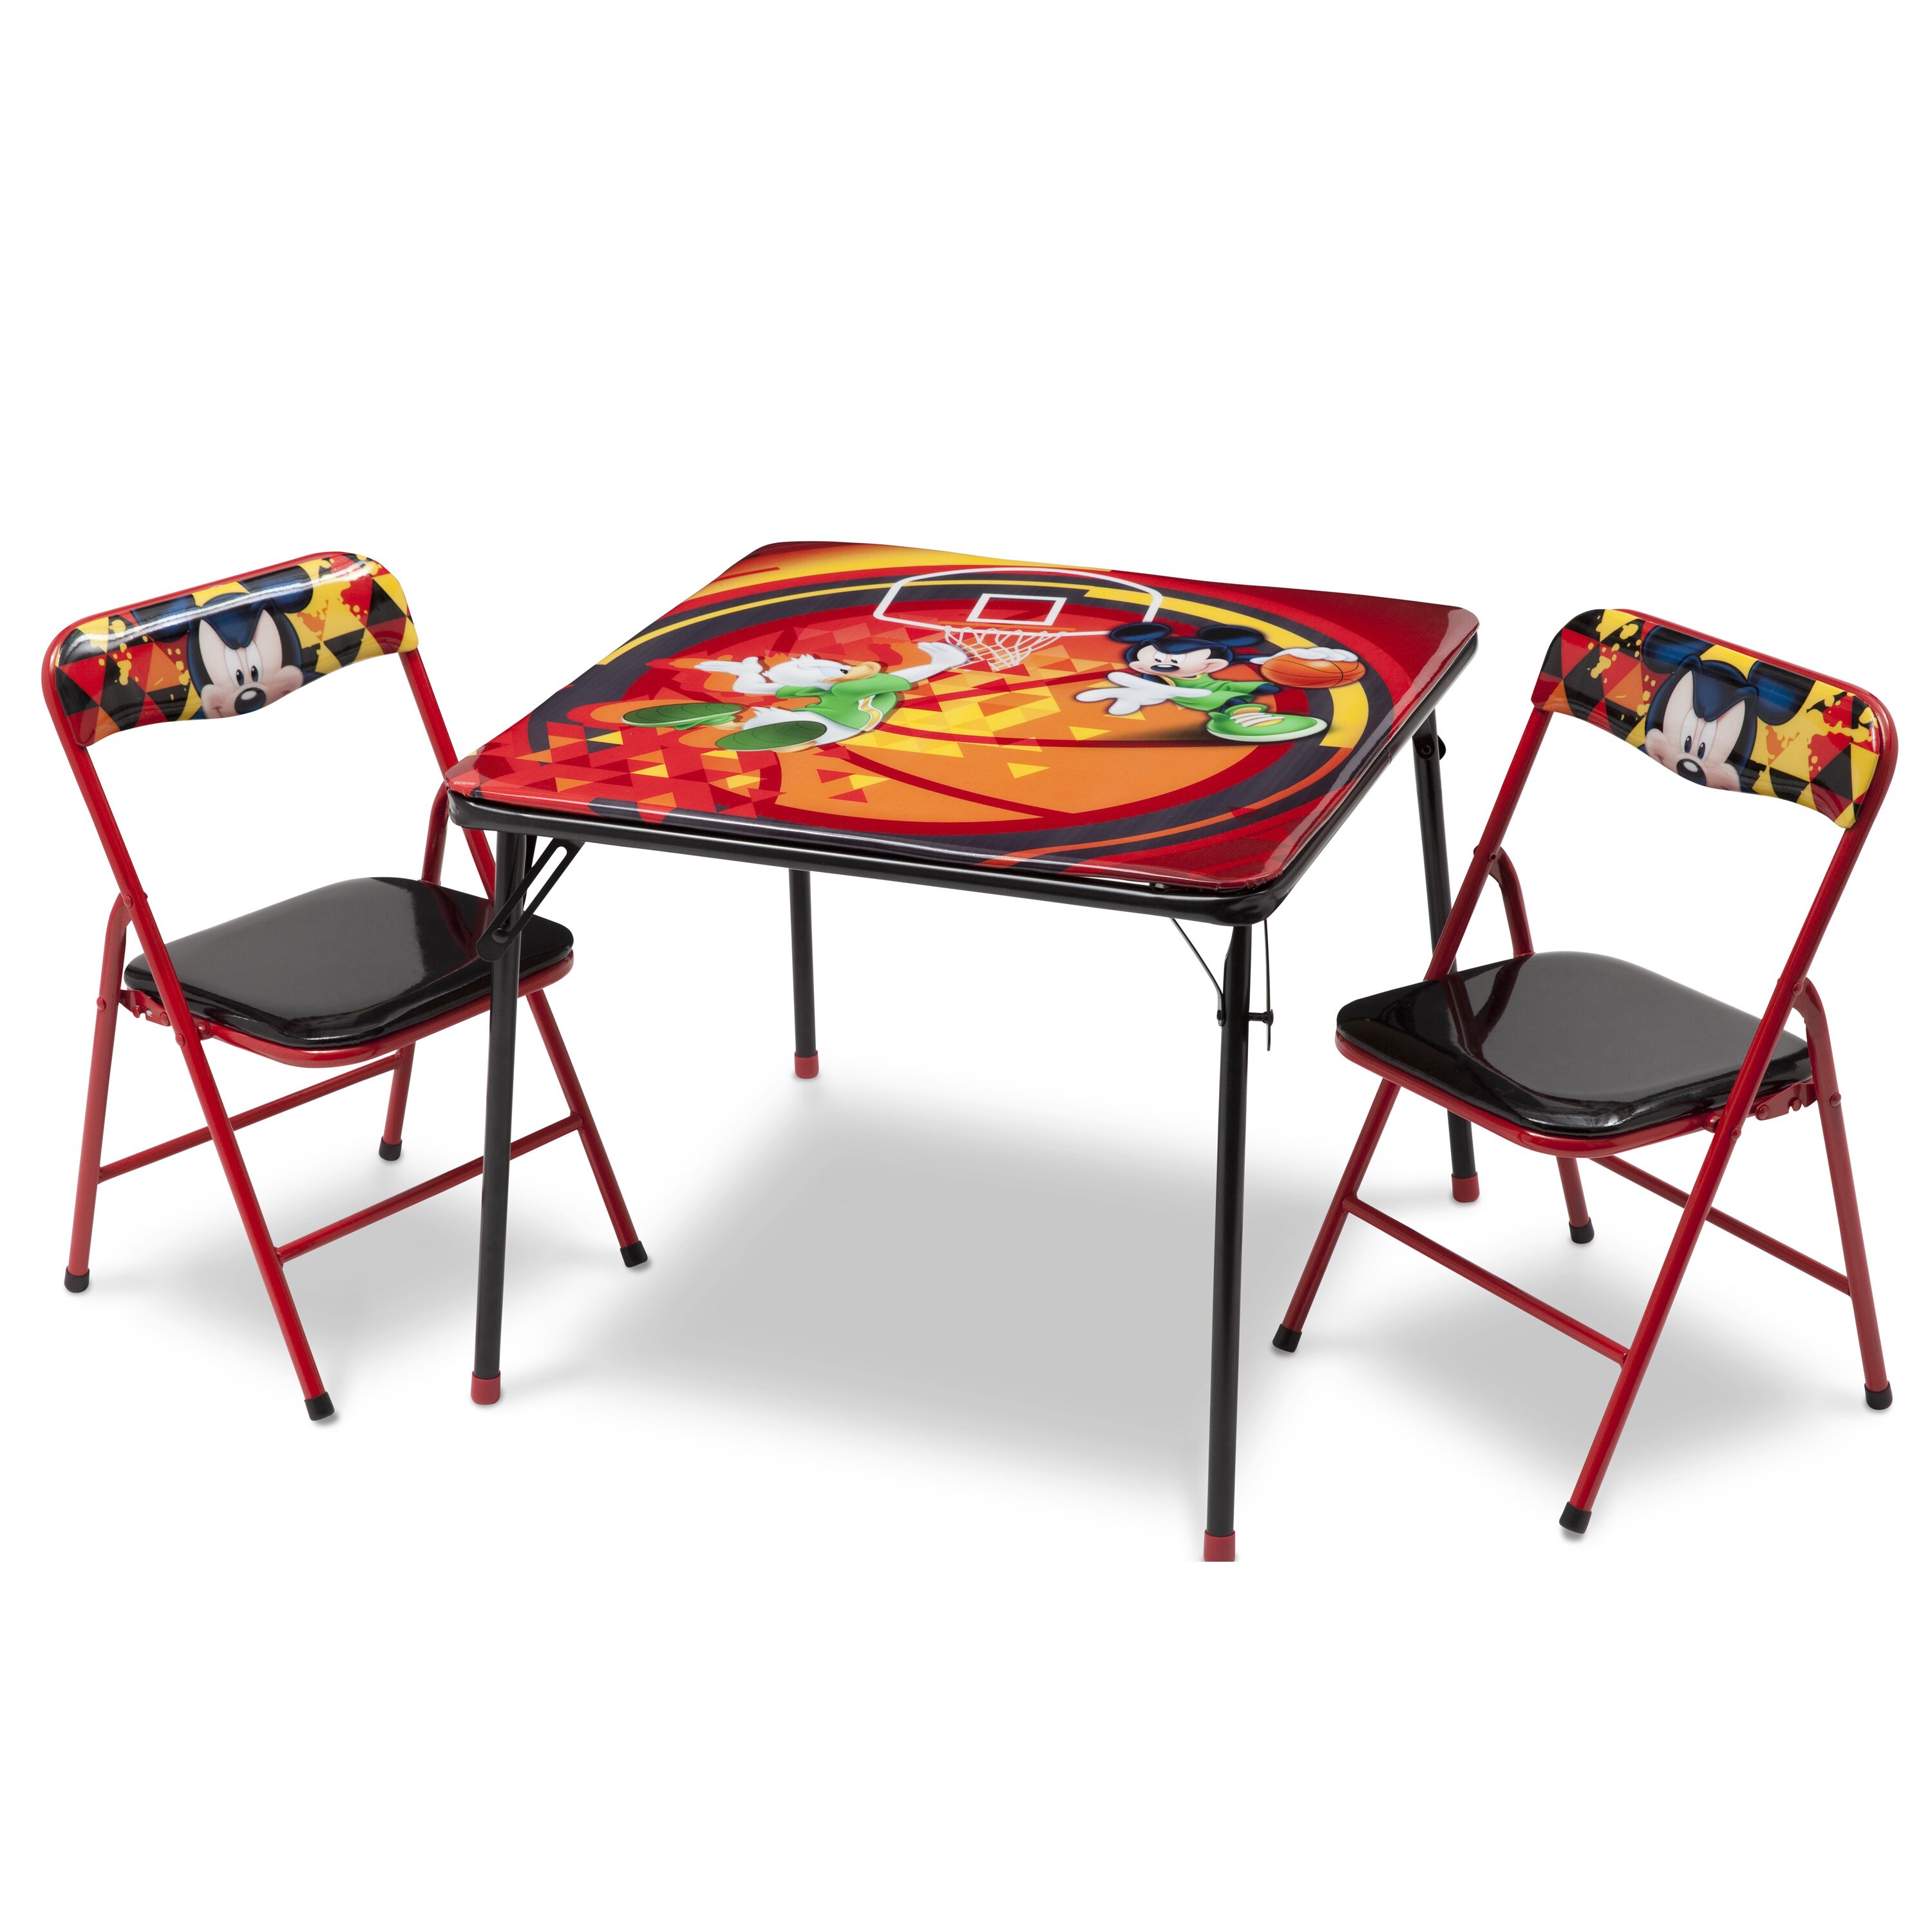 Delta Children Mickey Folding Children 3 Piece Square Table And Chair Set 